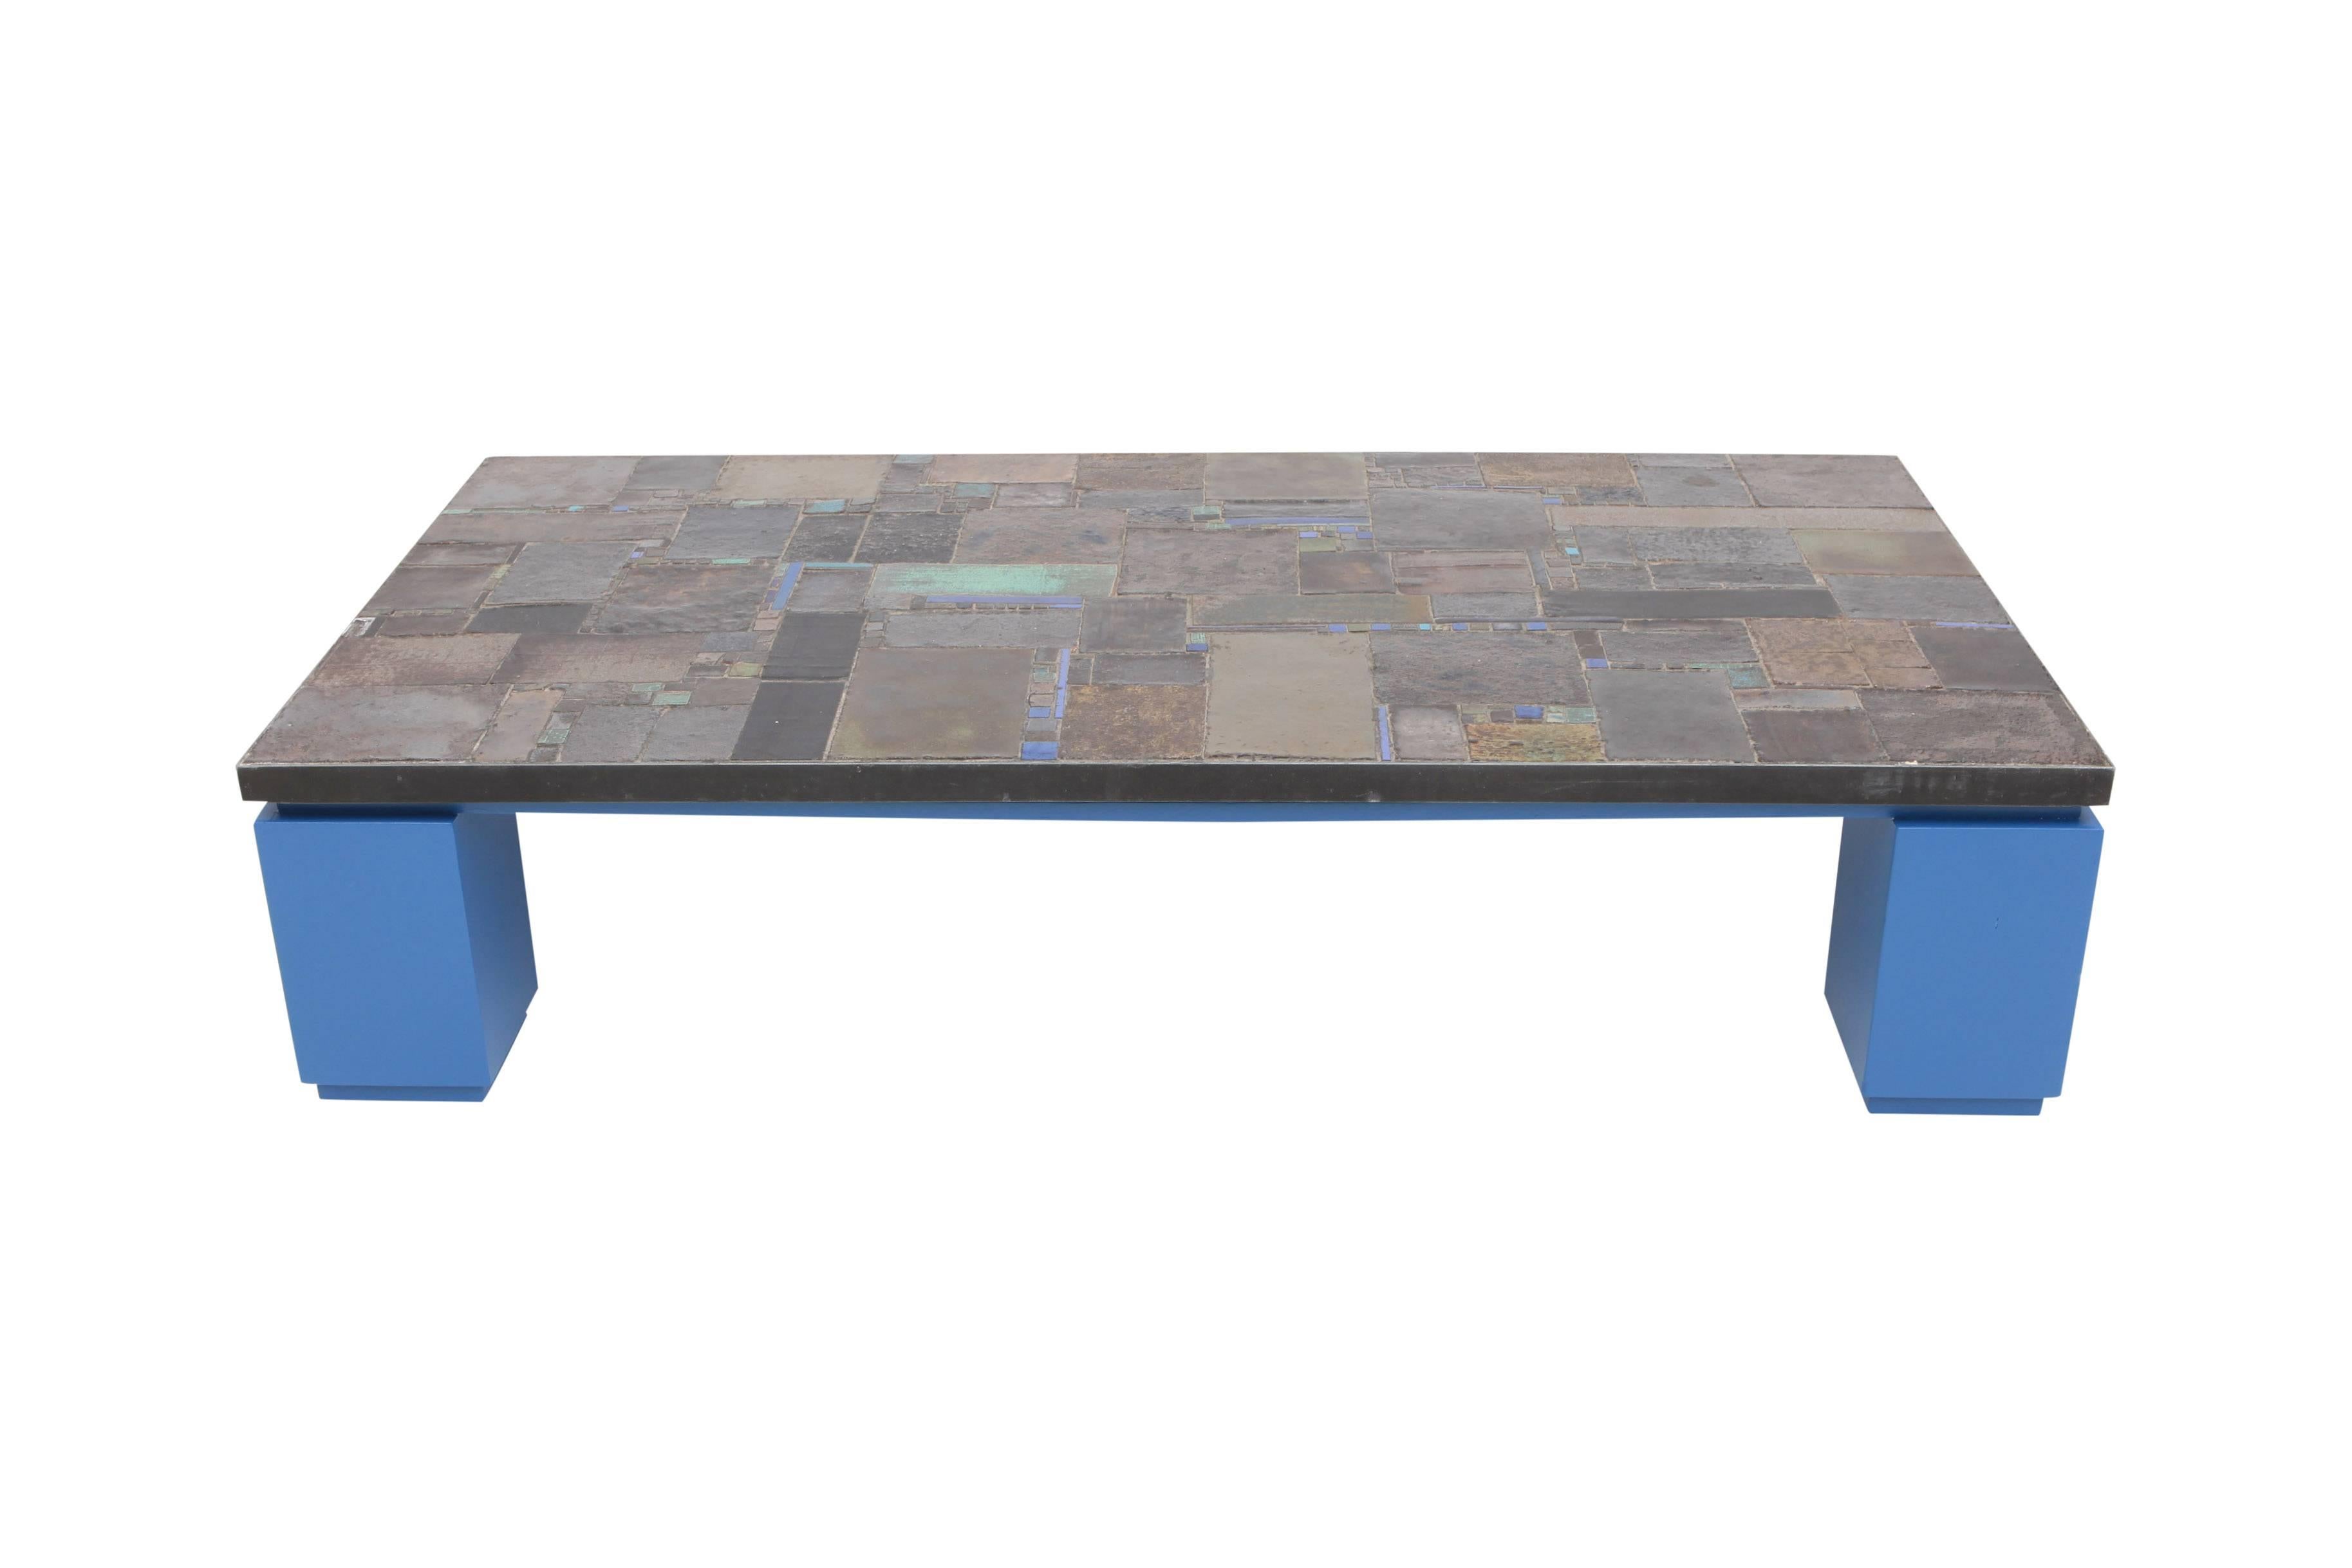 Mid-Century Modern Rectangular ceramic tile coffee table by Pia Manu mounted on antique blue lacquered base

One of the colors and glazes used in the tabletop hints to the use of color in the base which makes it a very fresh and high-end looking